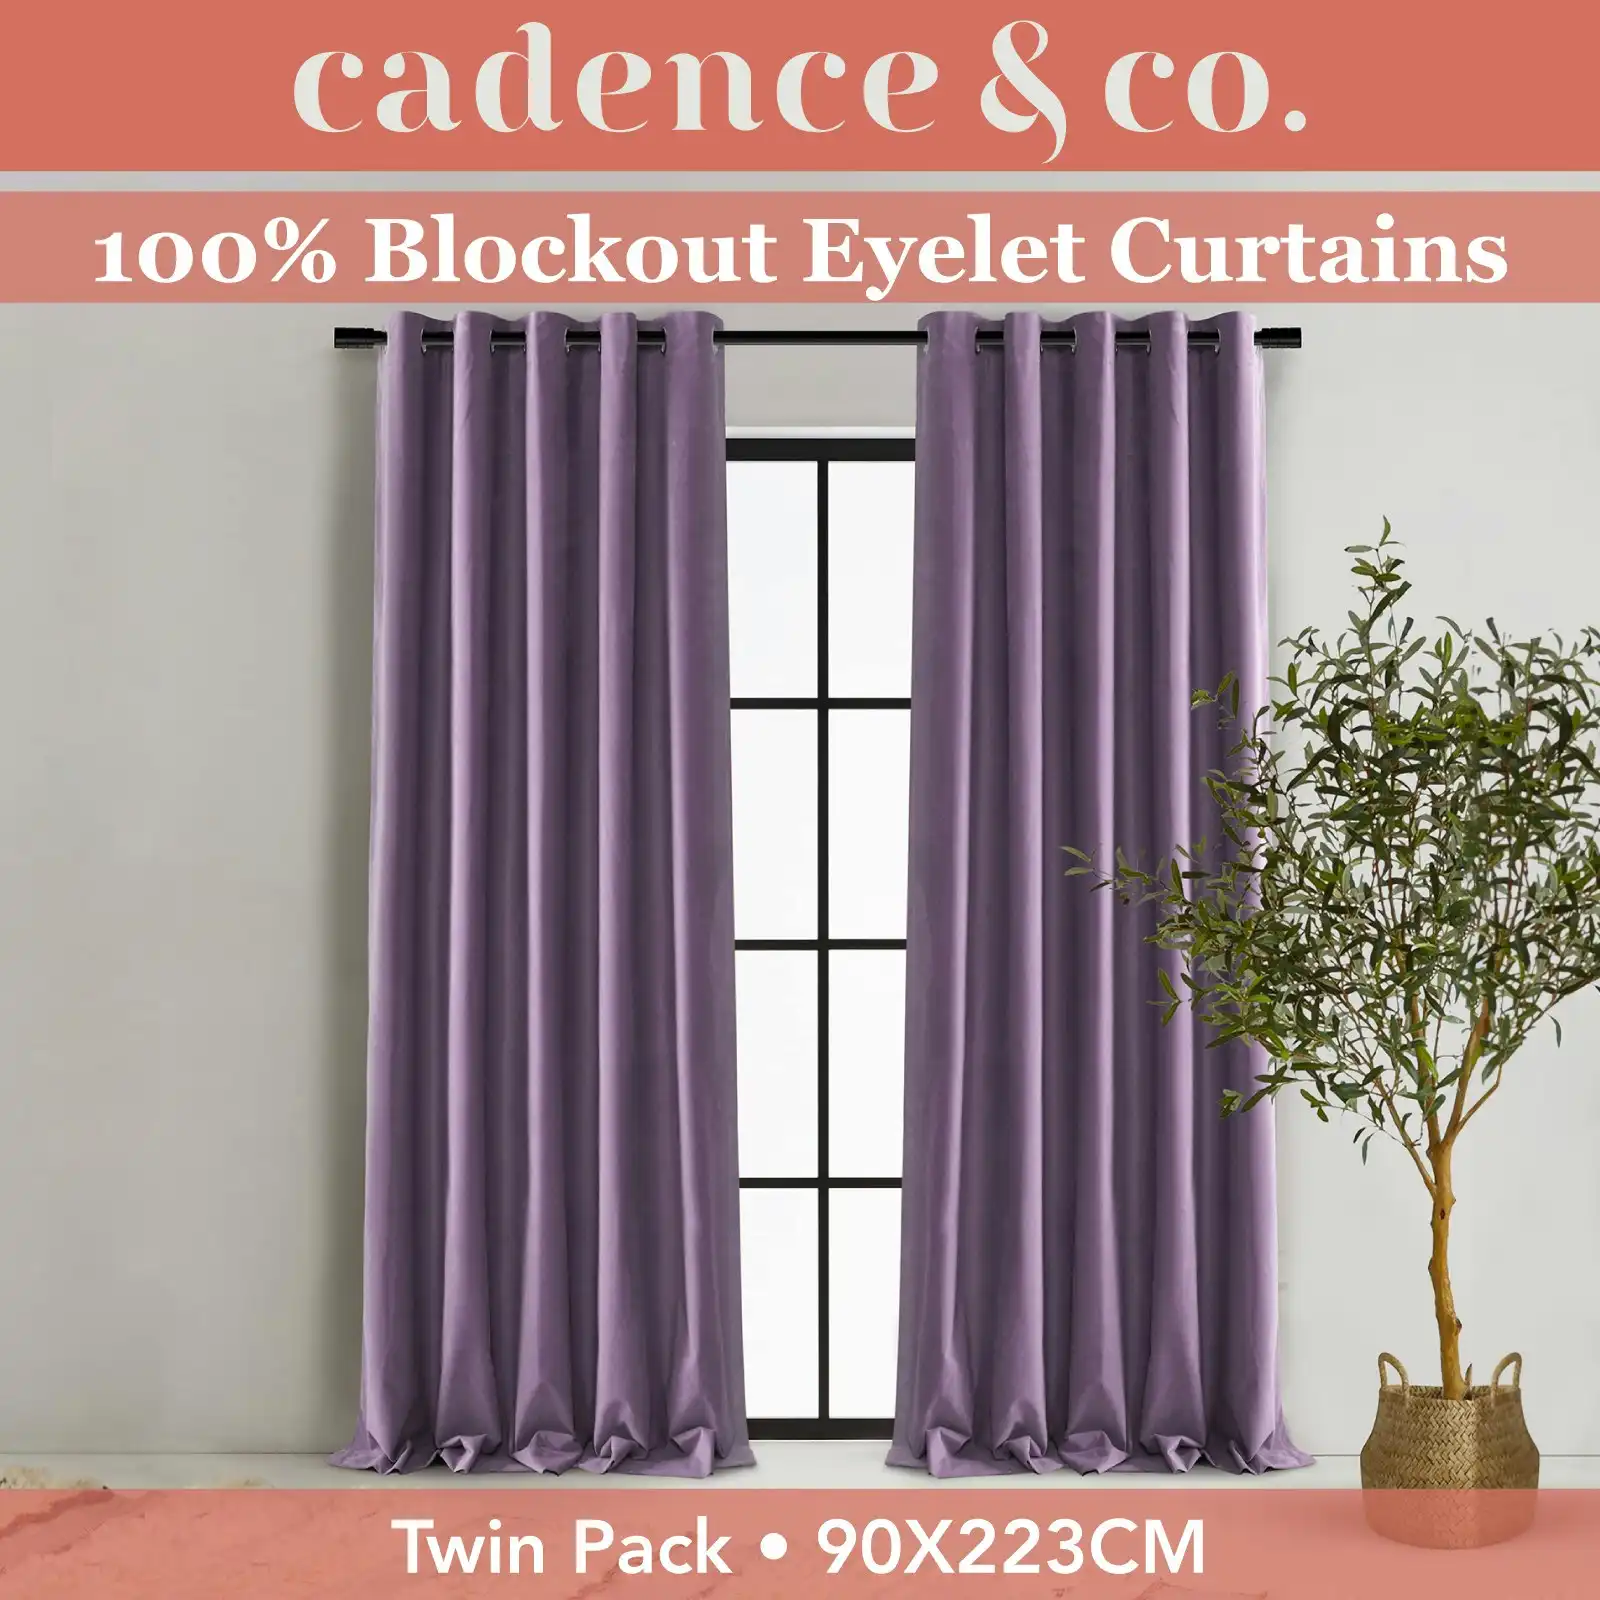 Cadence & Co. Byron Matte Velvet 100% Blockout Eyelet Curtains Twin Pack Lilac 90x223cm